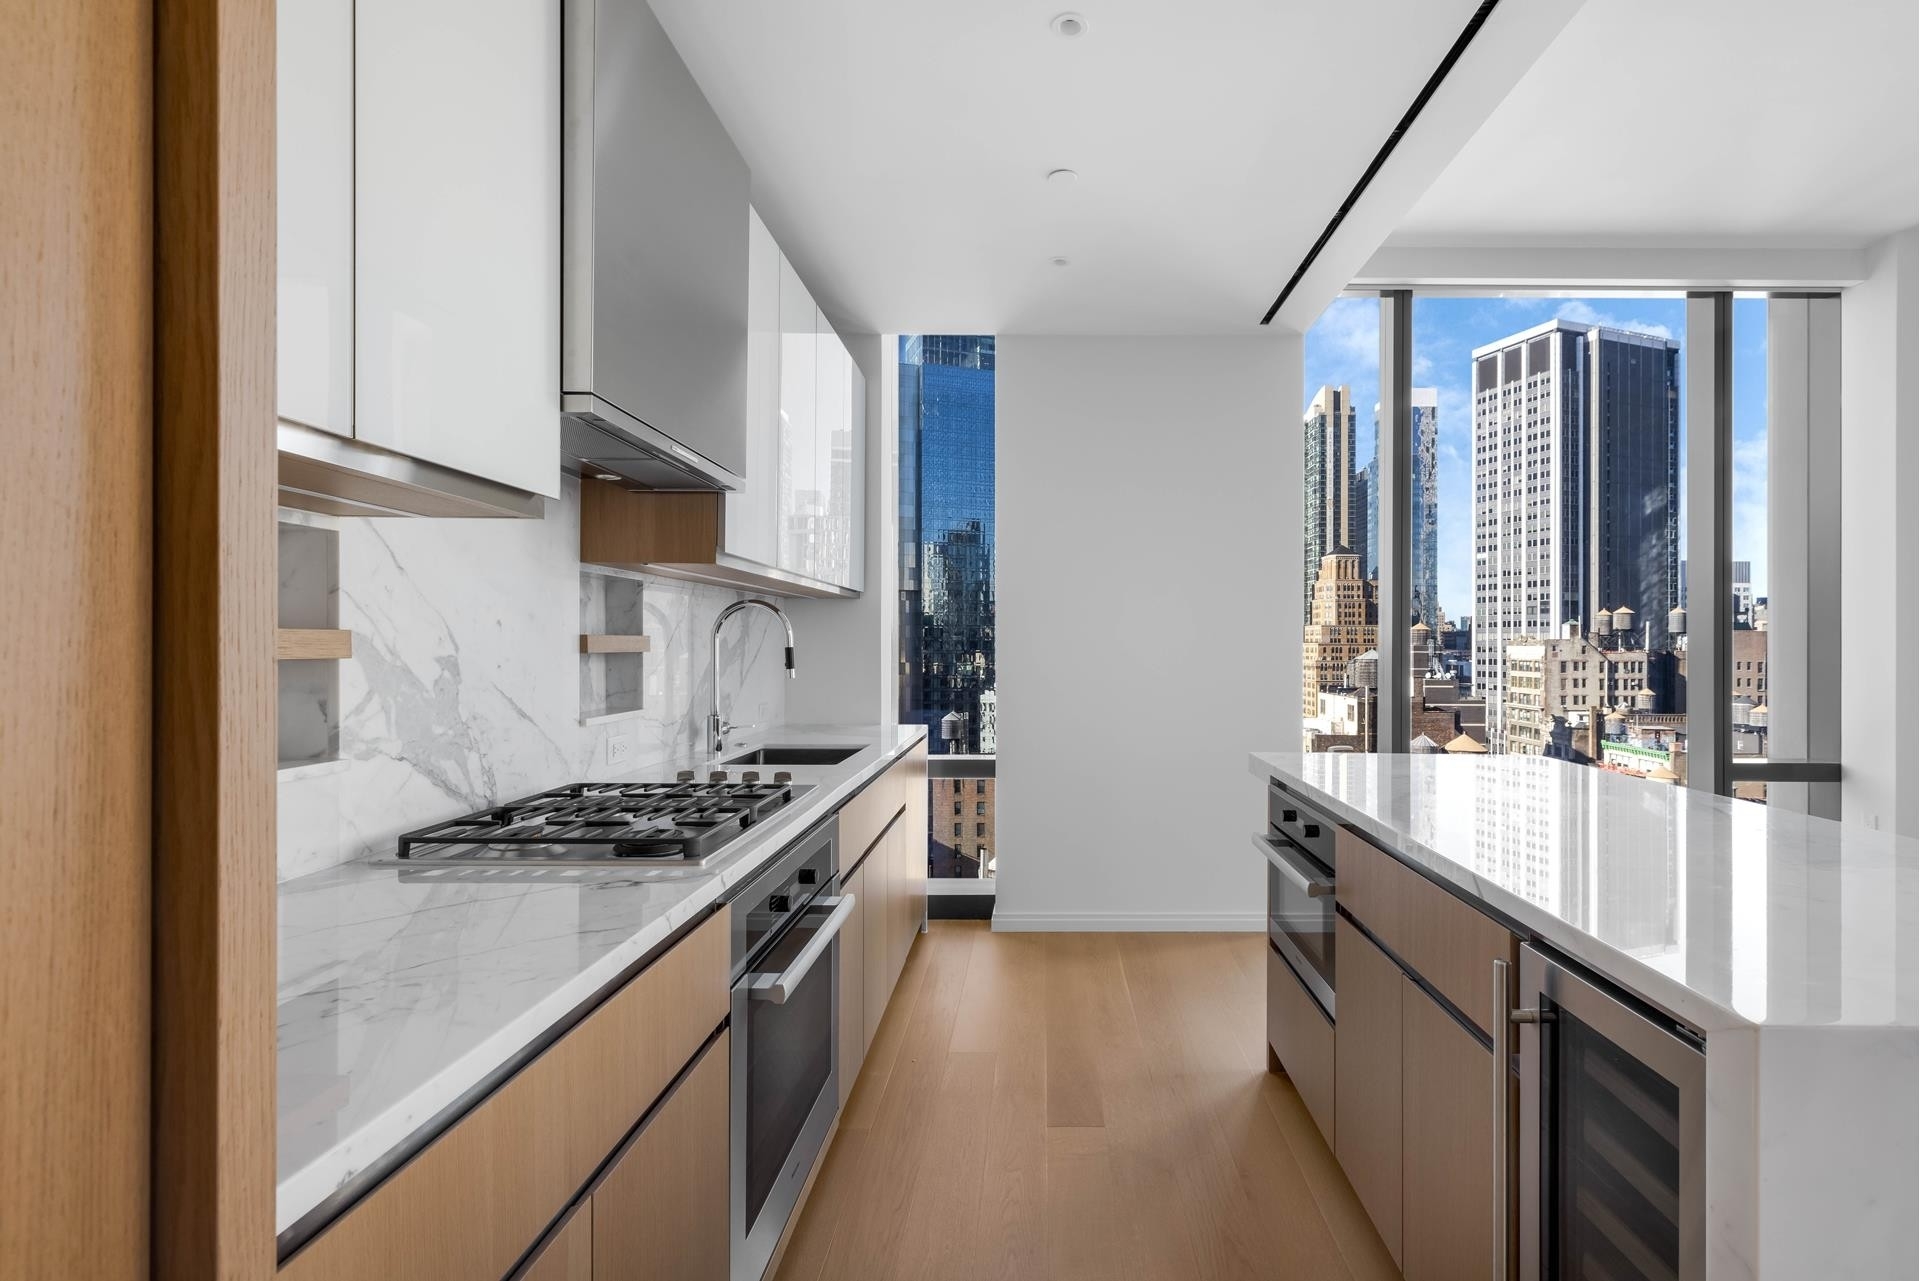 Property at 277 FIFTH AVE, 22A NoMad, New York, NY 10016